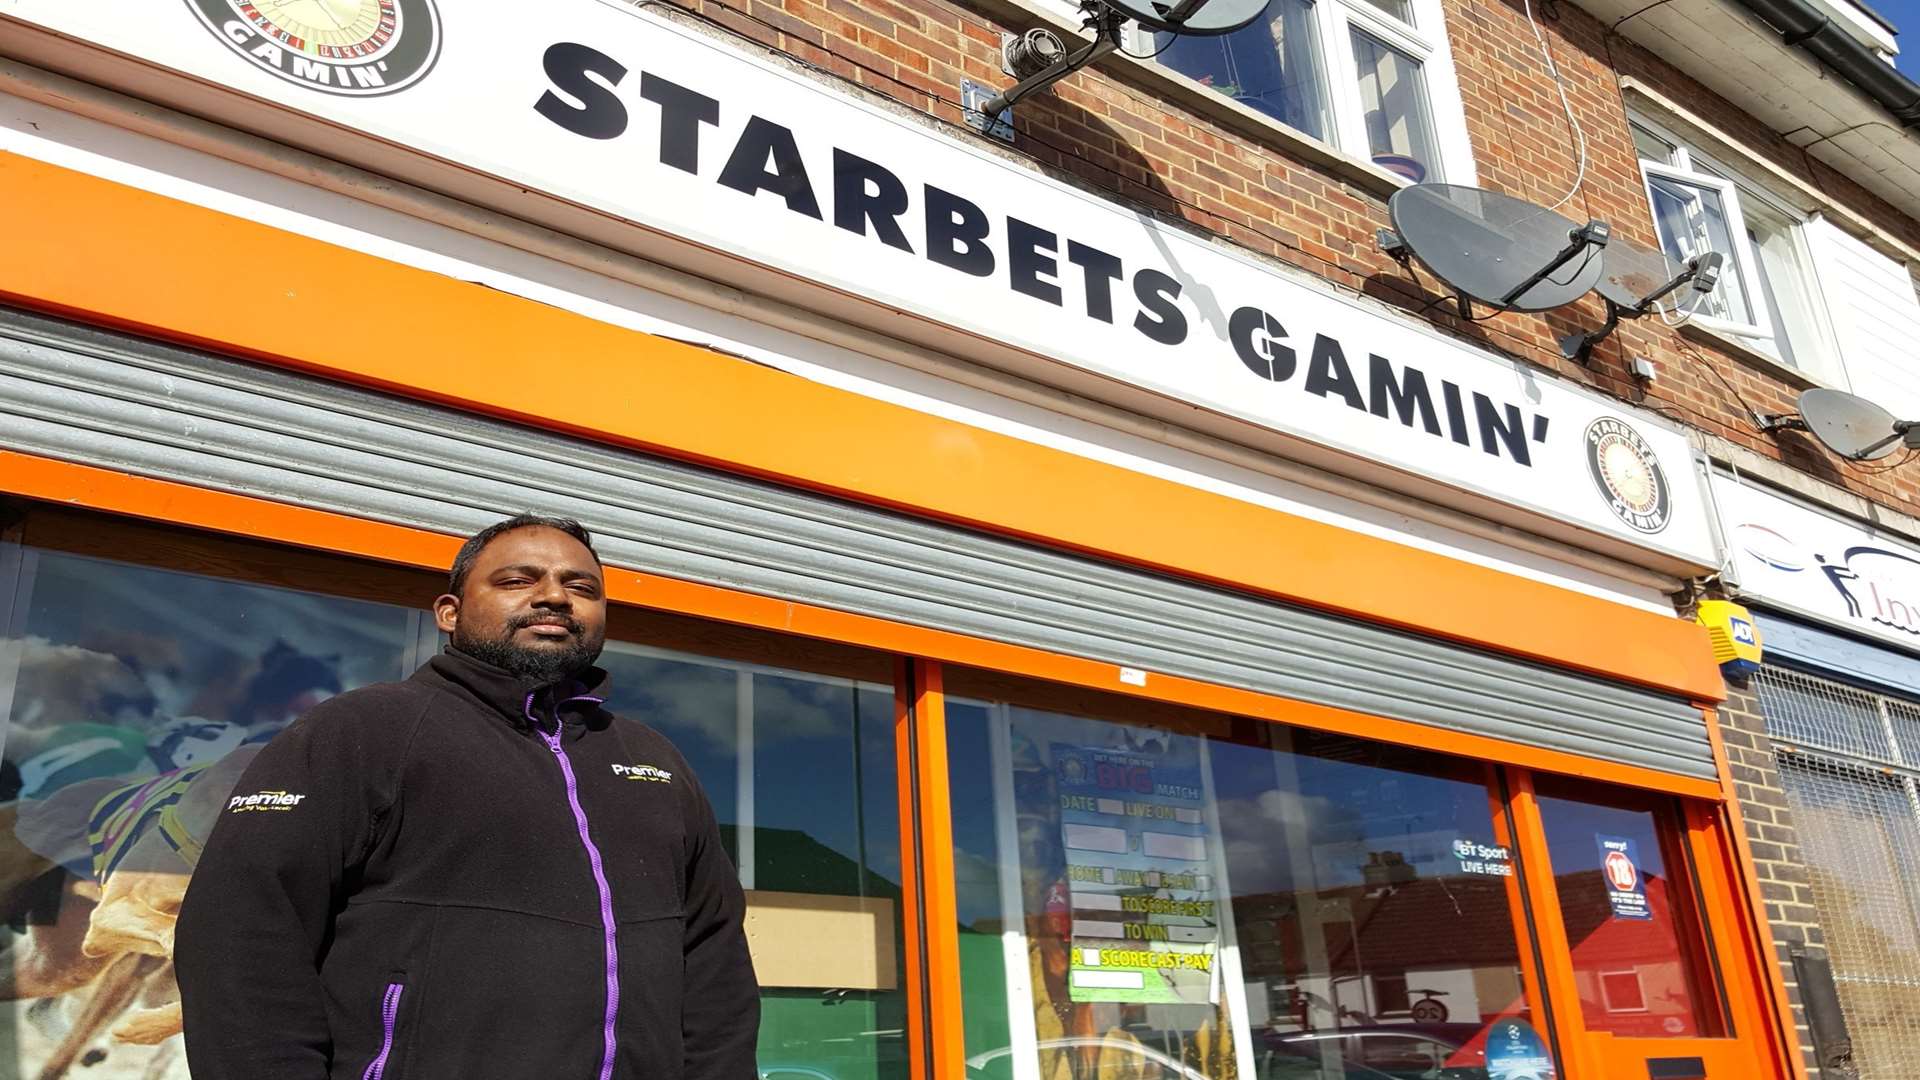 Thambiah Senthan is opening a takeaway in the former Starbets Gamin'